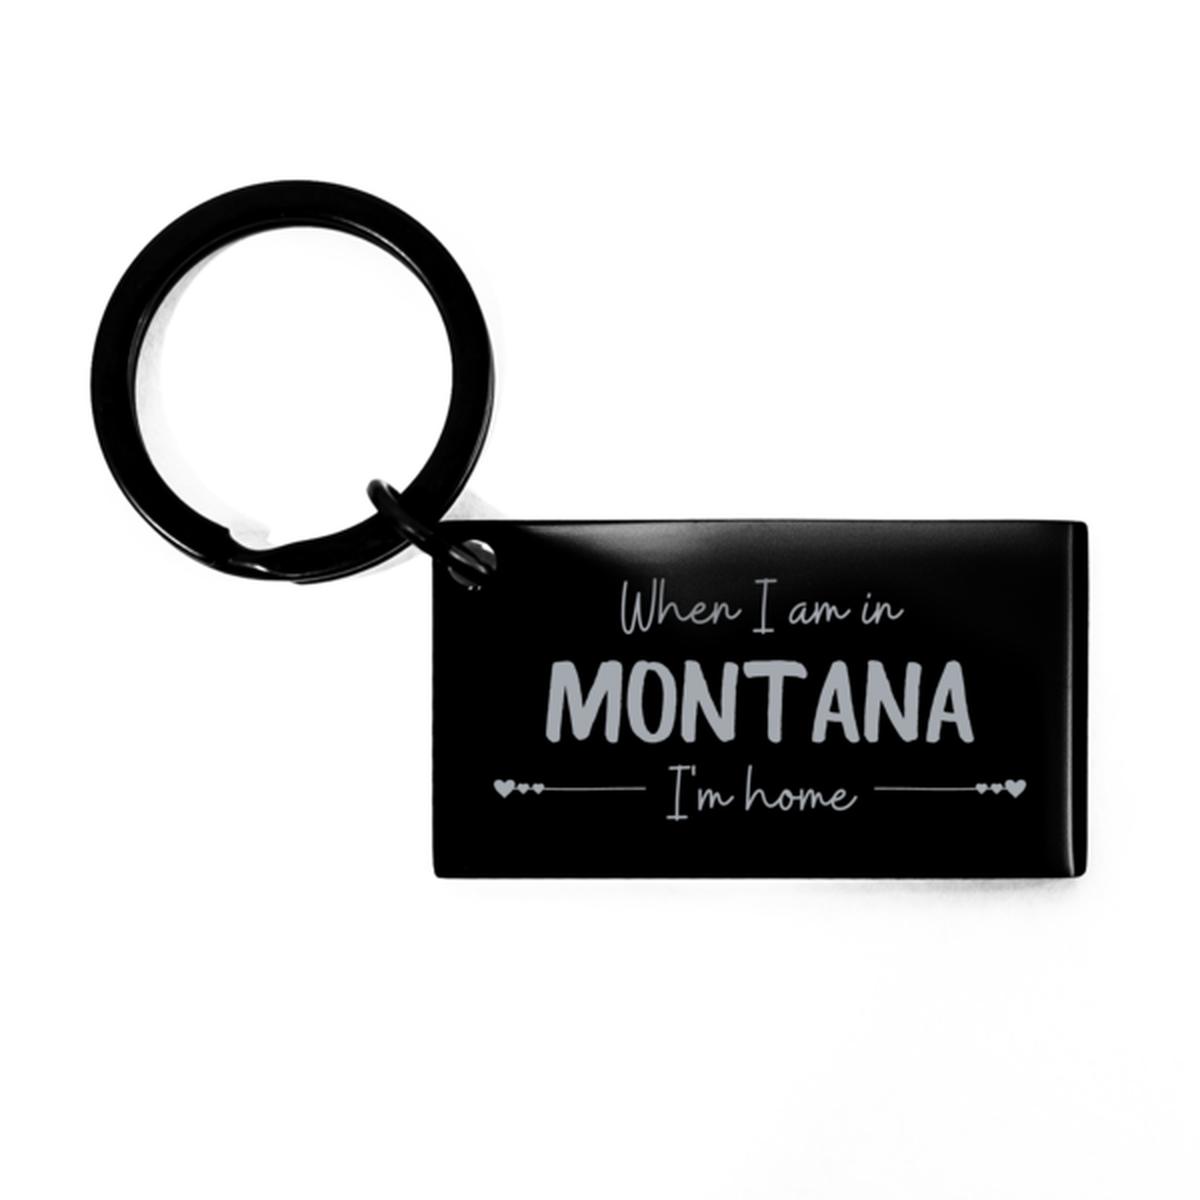 When I am in Montana I'm home Keychain, Cheap Gifts For Montana, State Montana Birthday Gifts for Friends Coworker